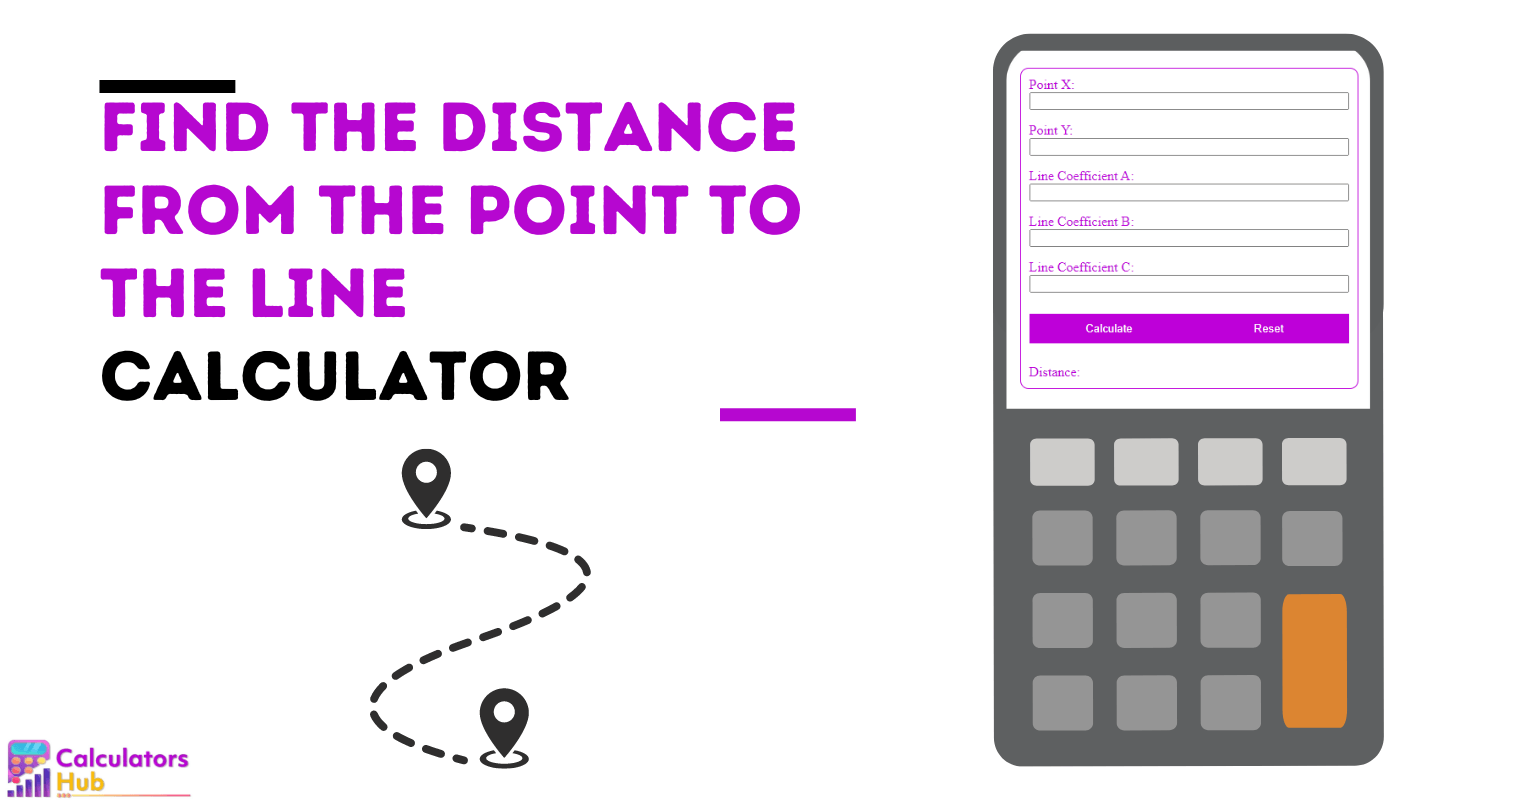 Find the Distance from the Point to the Line Calculator